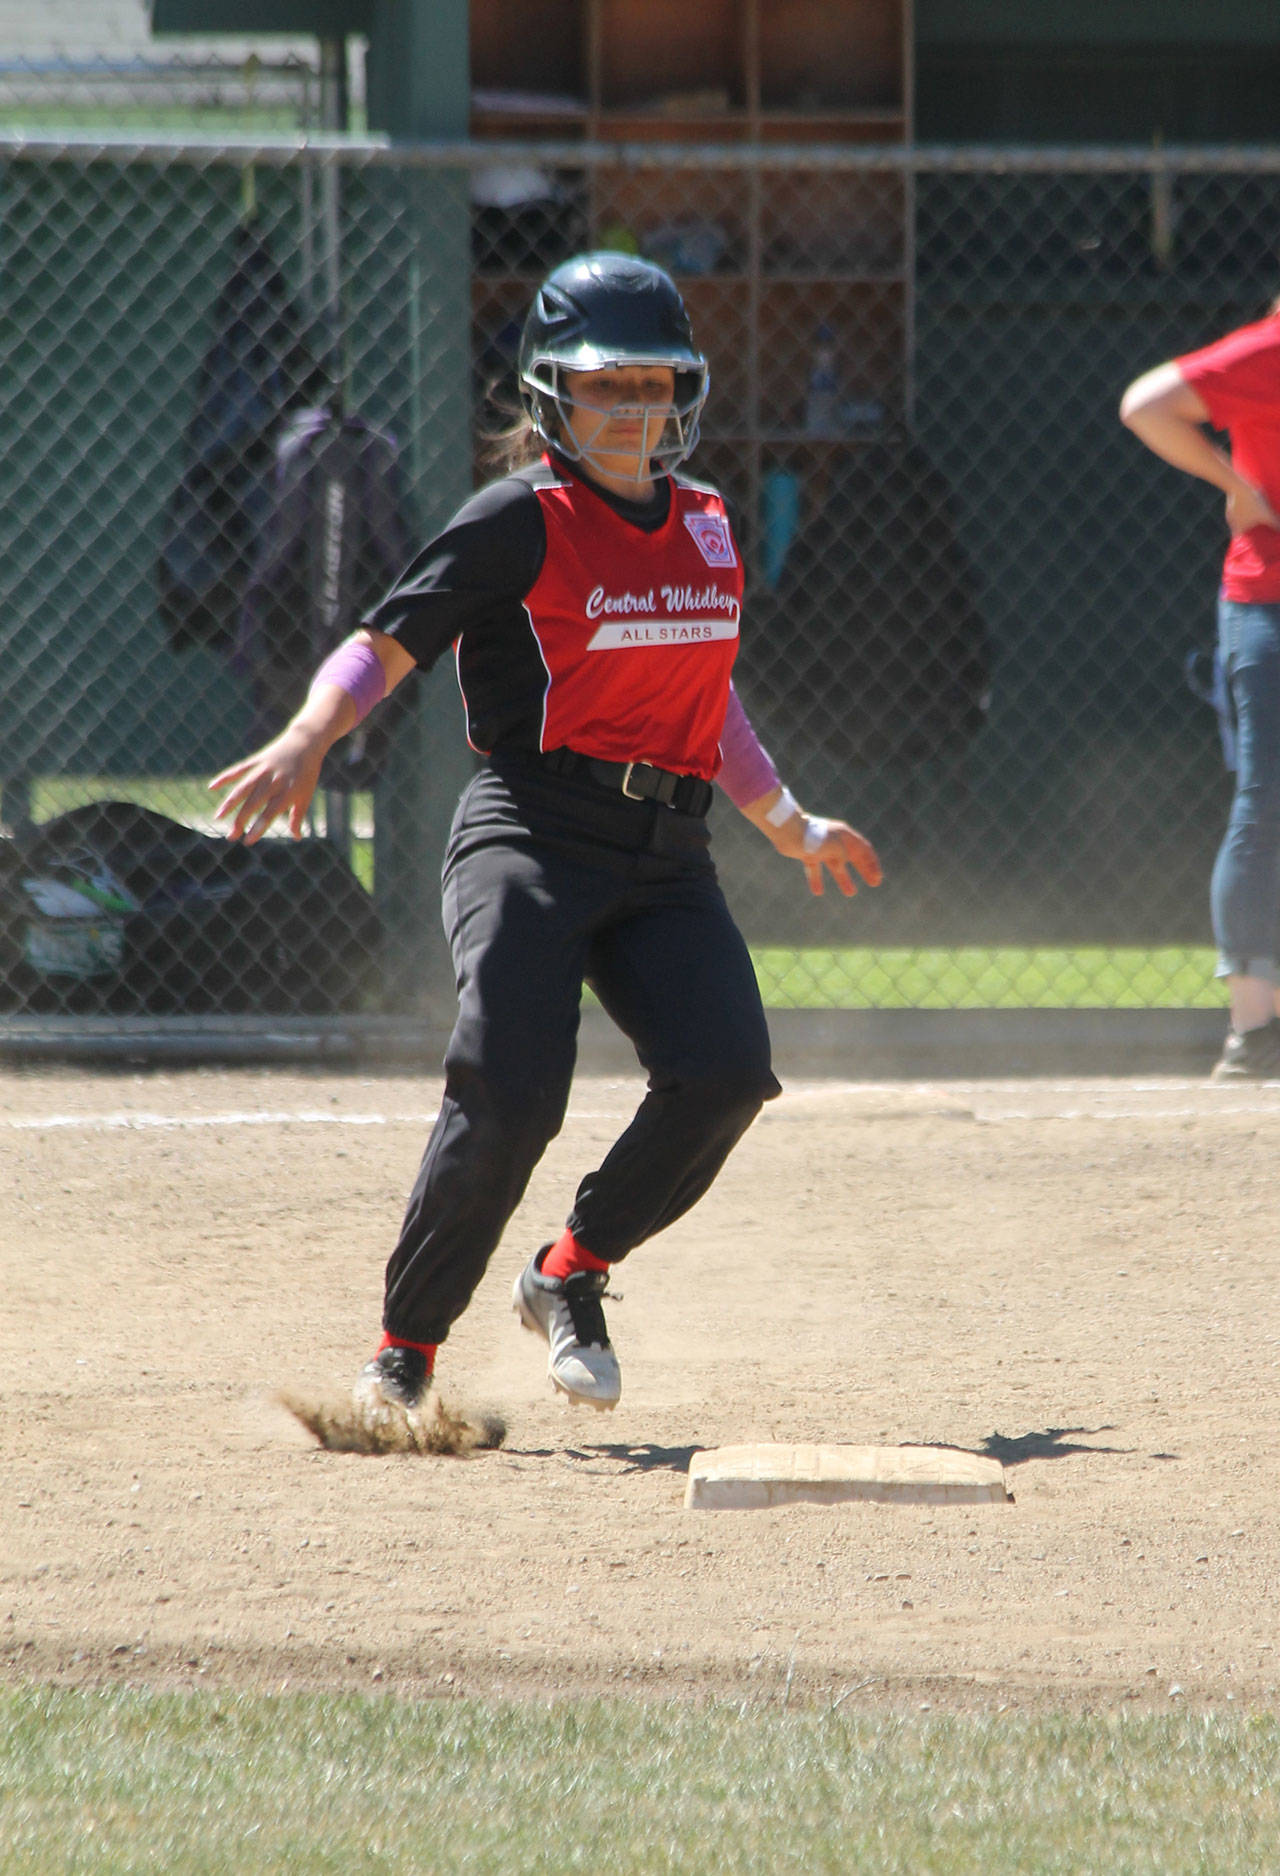 Allison Nastali puts on the brakes as she steals second base.(Photo by Jim Waller/Whidbey News-Times)